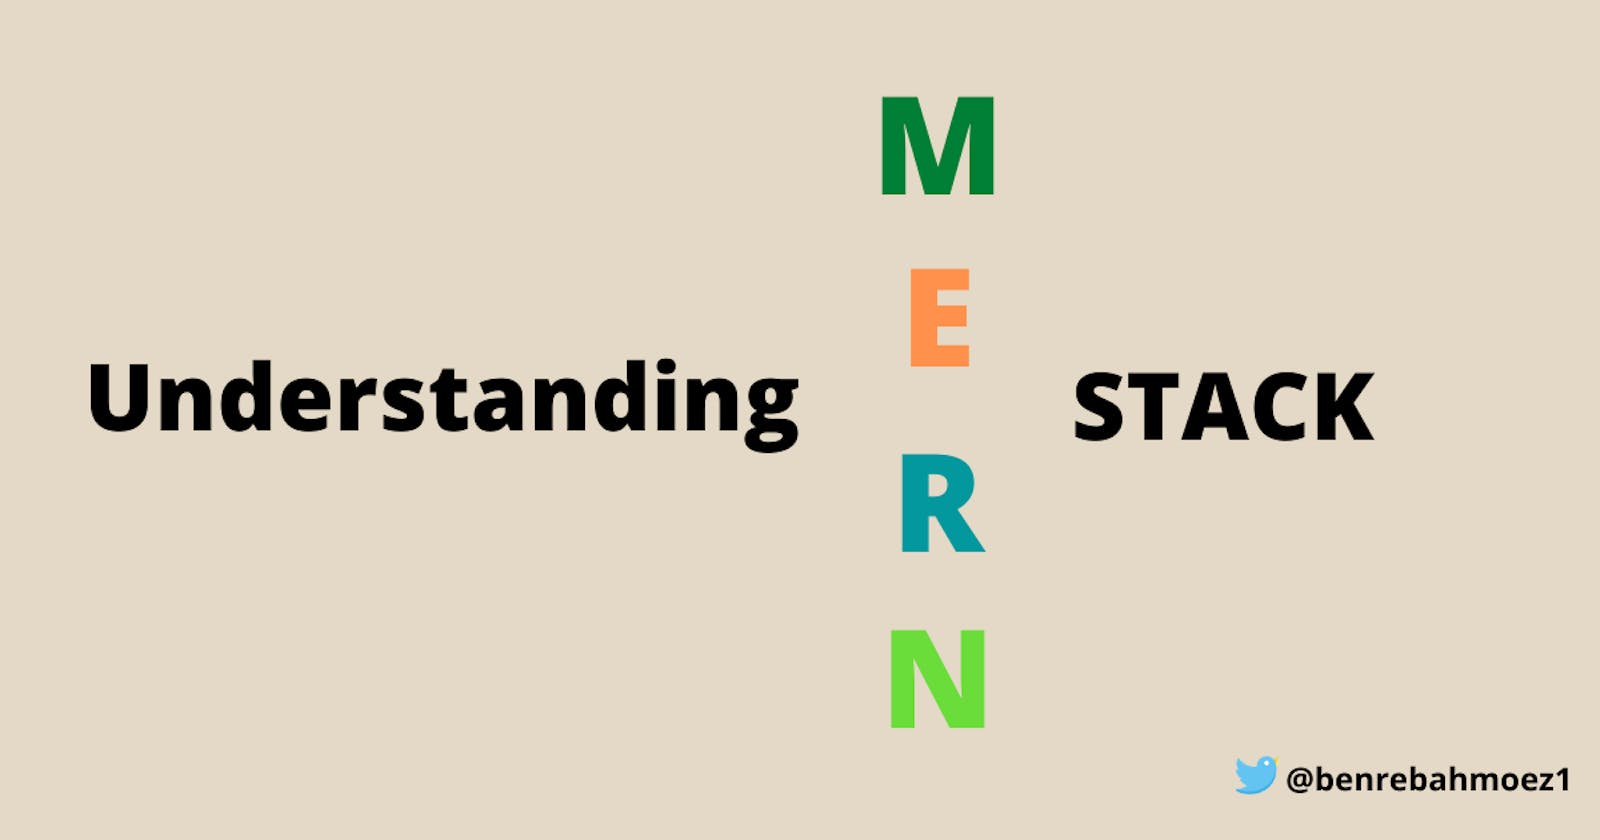 Understanding the M.E.R.N Stack